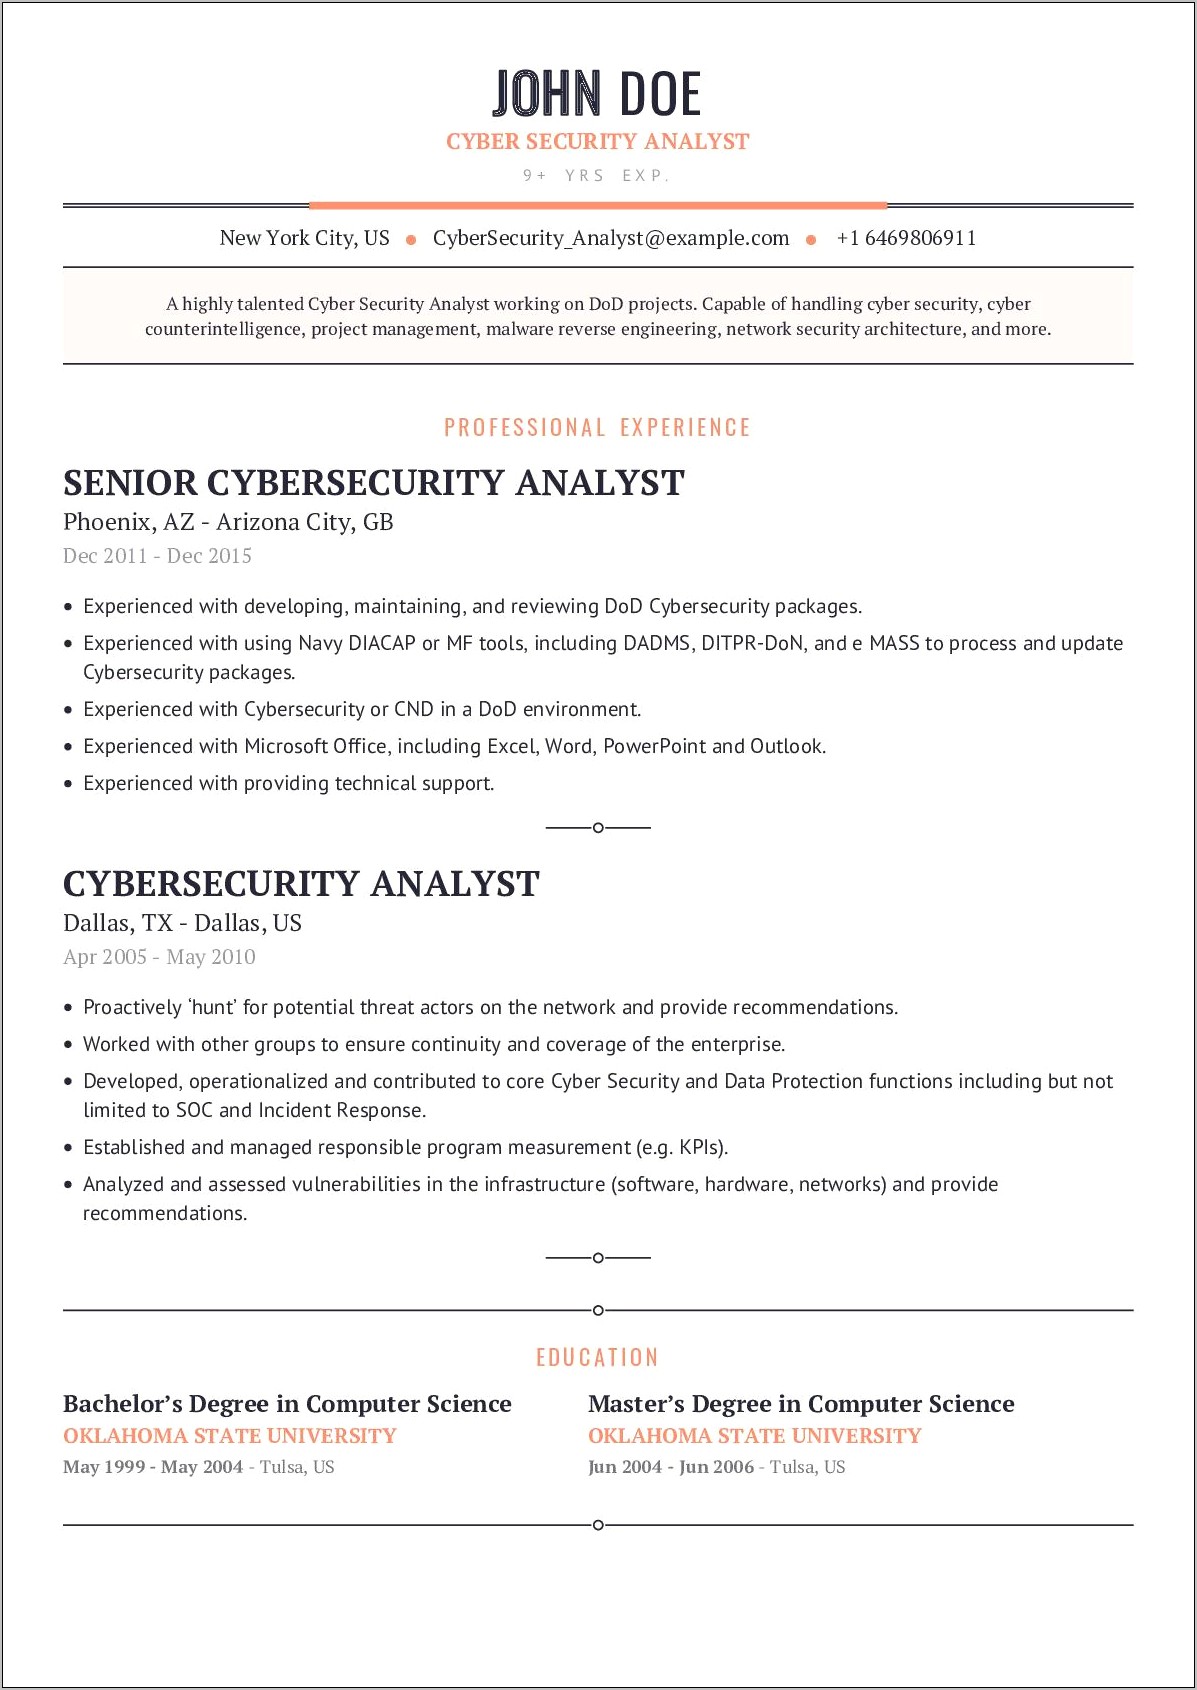 Resume Objective For Soc Analyst